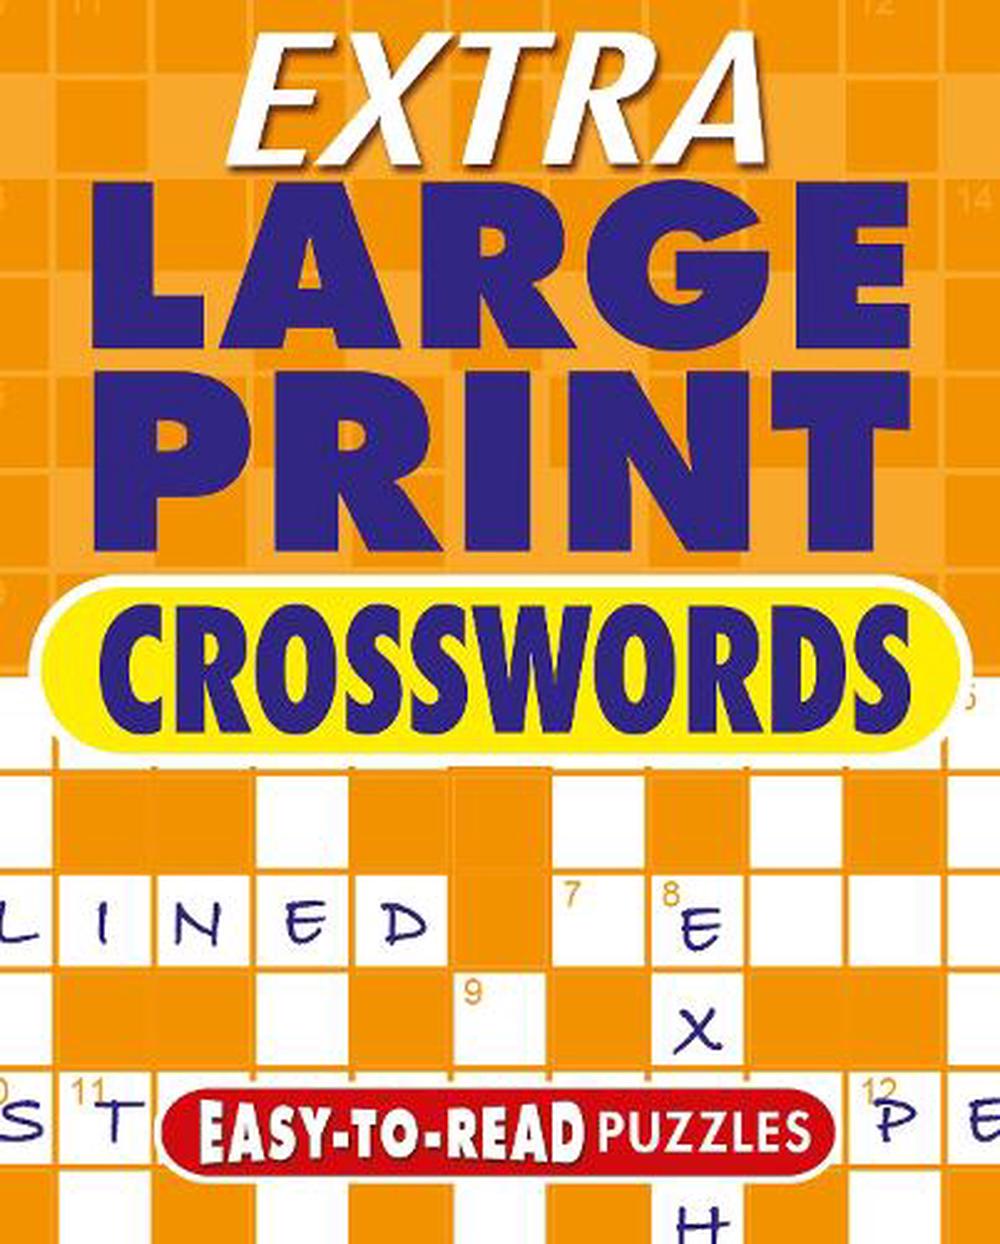 Extra Large Print Crosswords by Eric Saunders Paperback 9781398816220